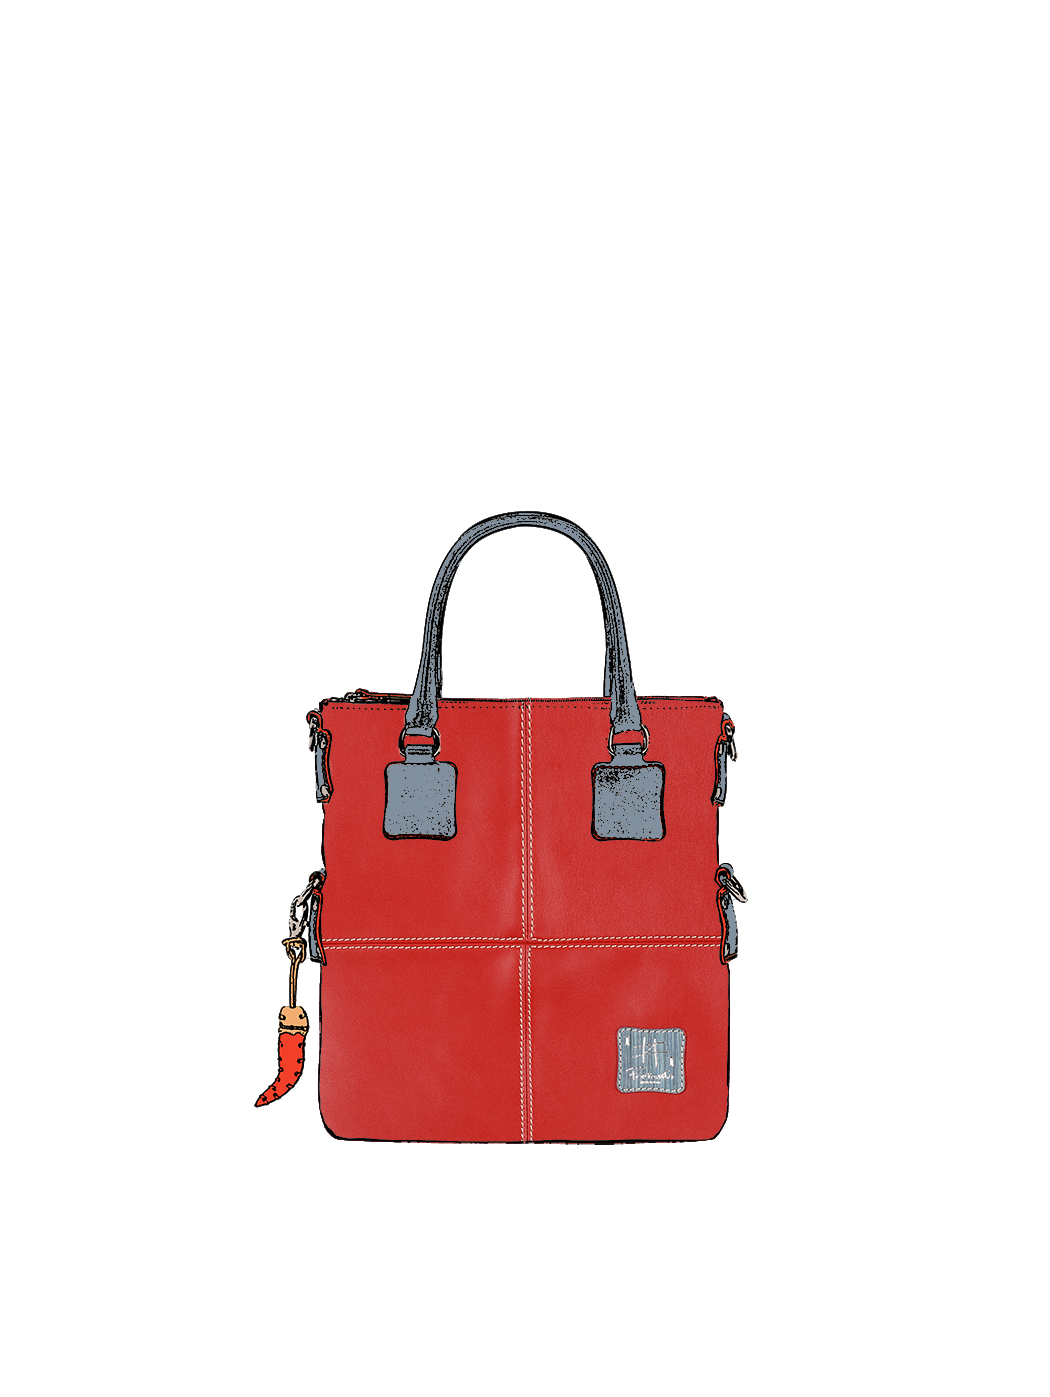 Women's Small Tote Leather Bag in Red